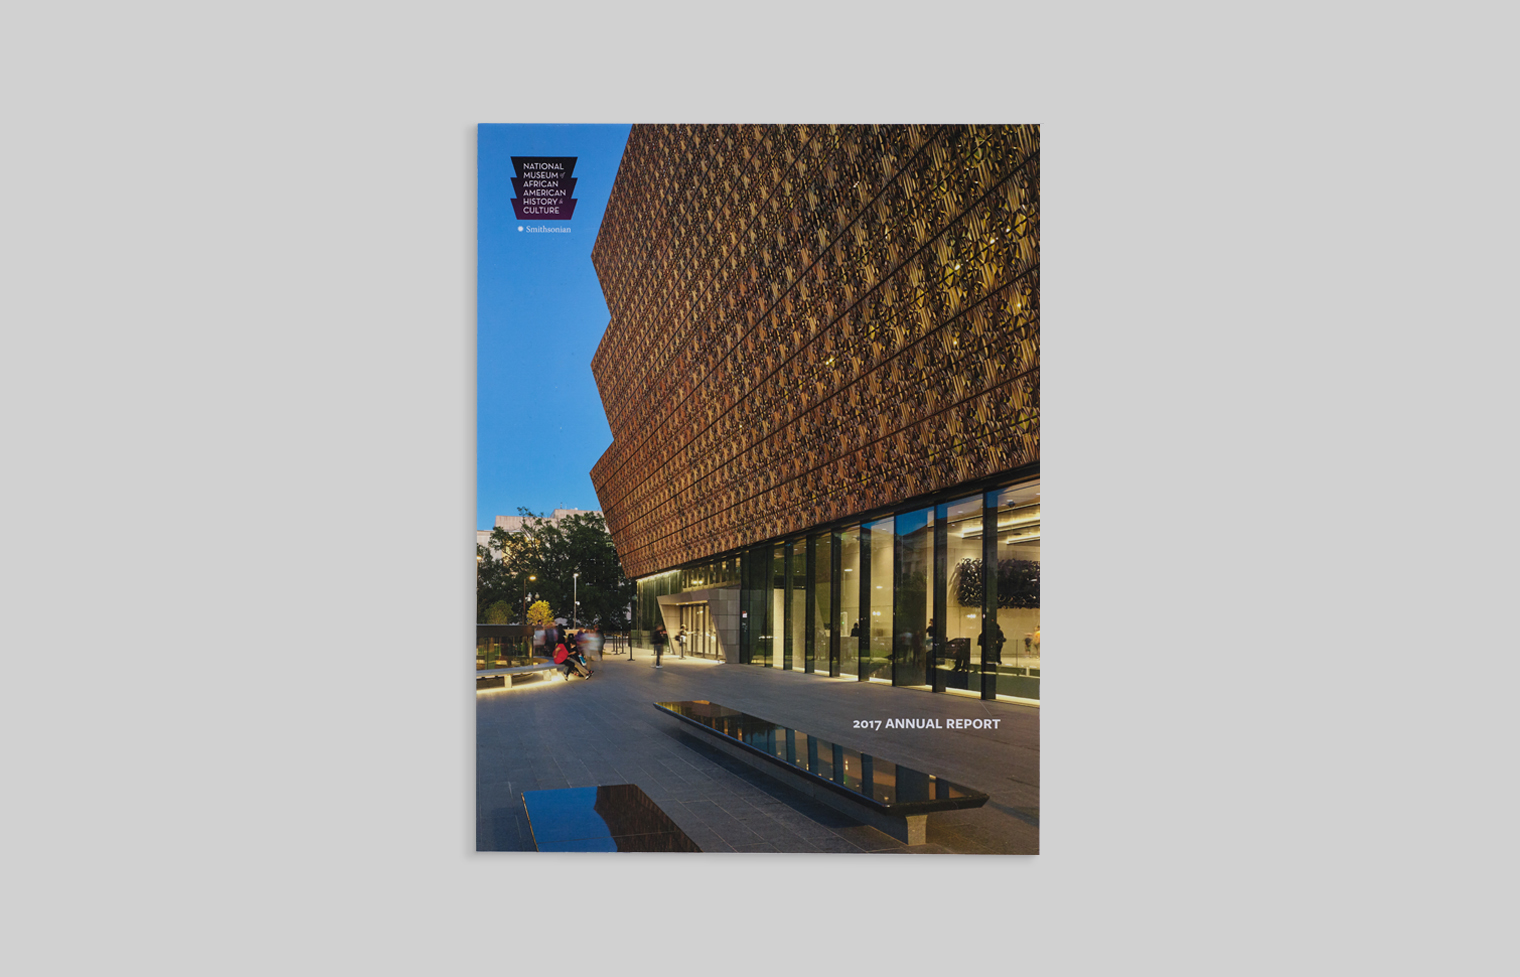 The distinctive building featured on the cover is meant to evoke the three-tiered crowns of Yoruban art from West Africa.